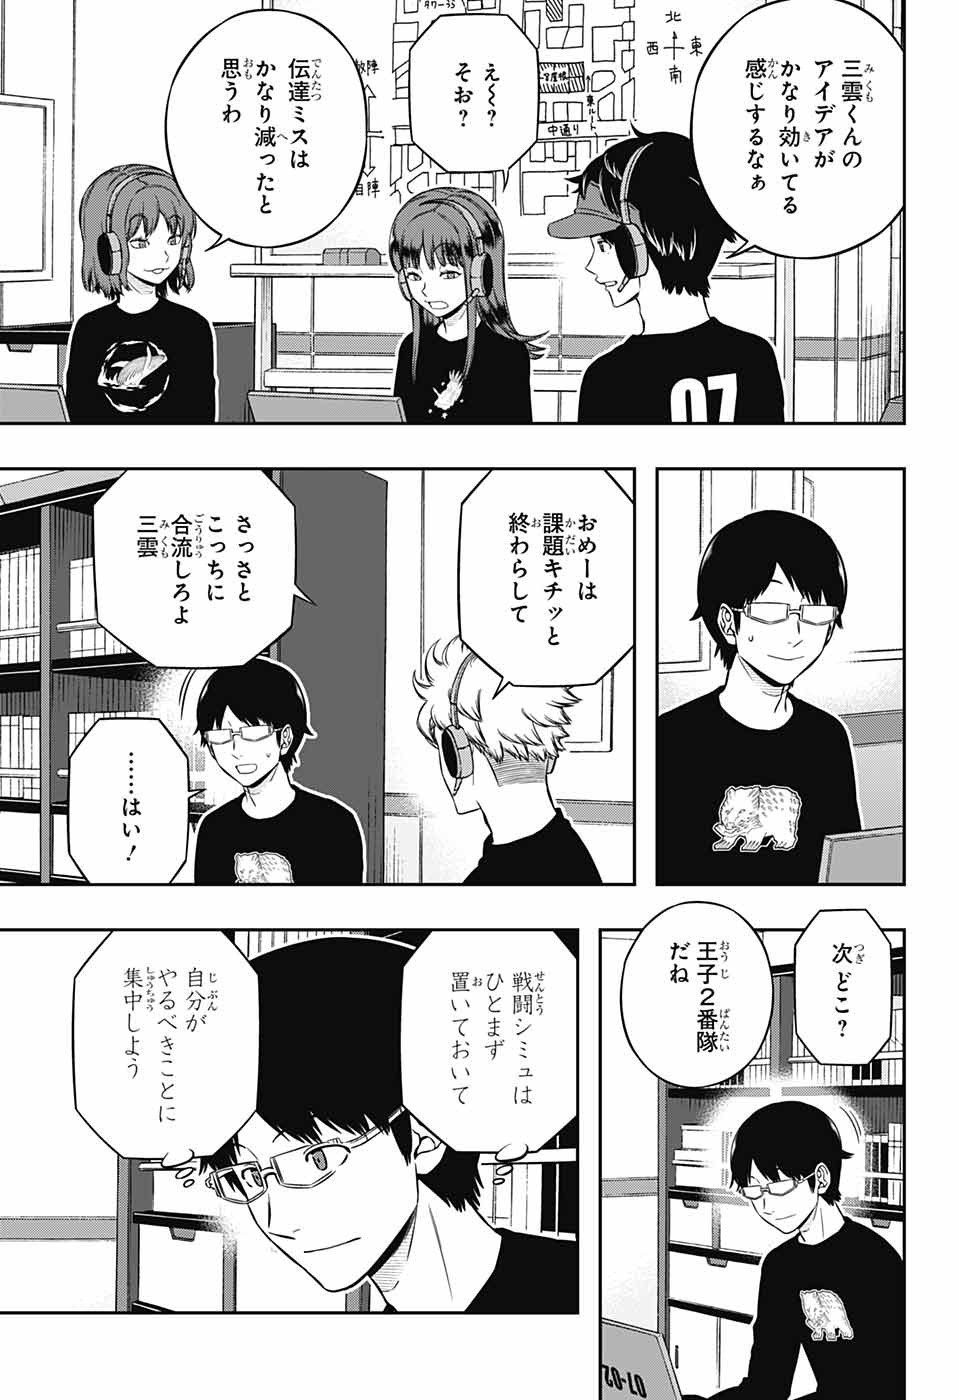 World Trigger - Chapter 219 - Page 5